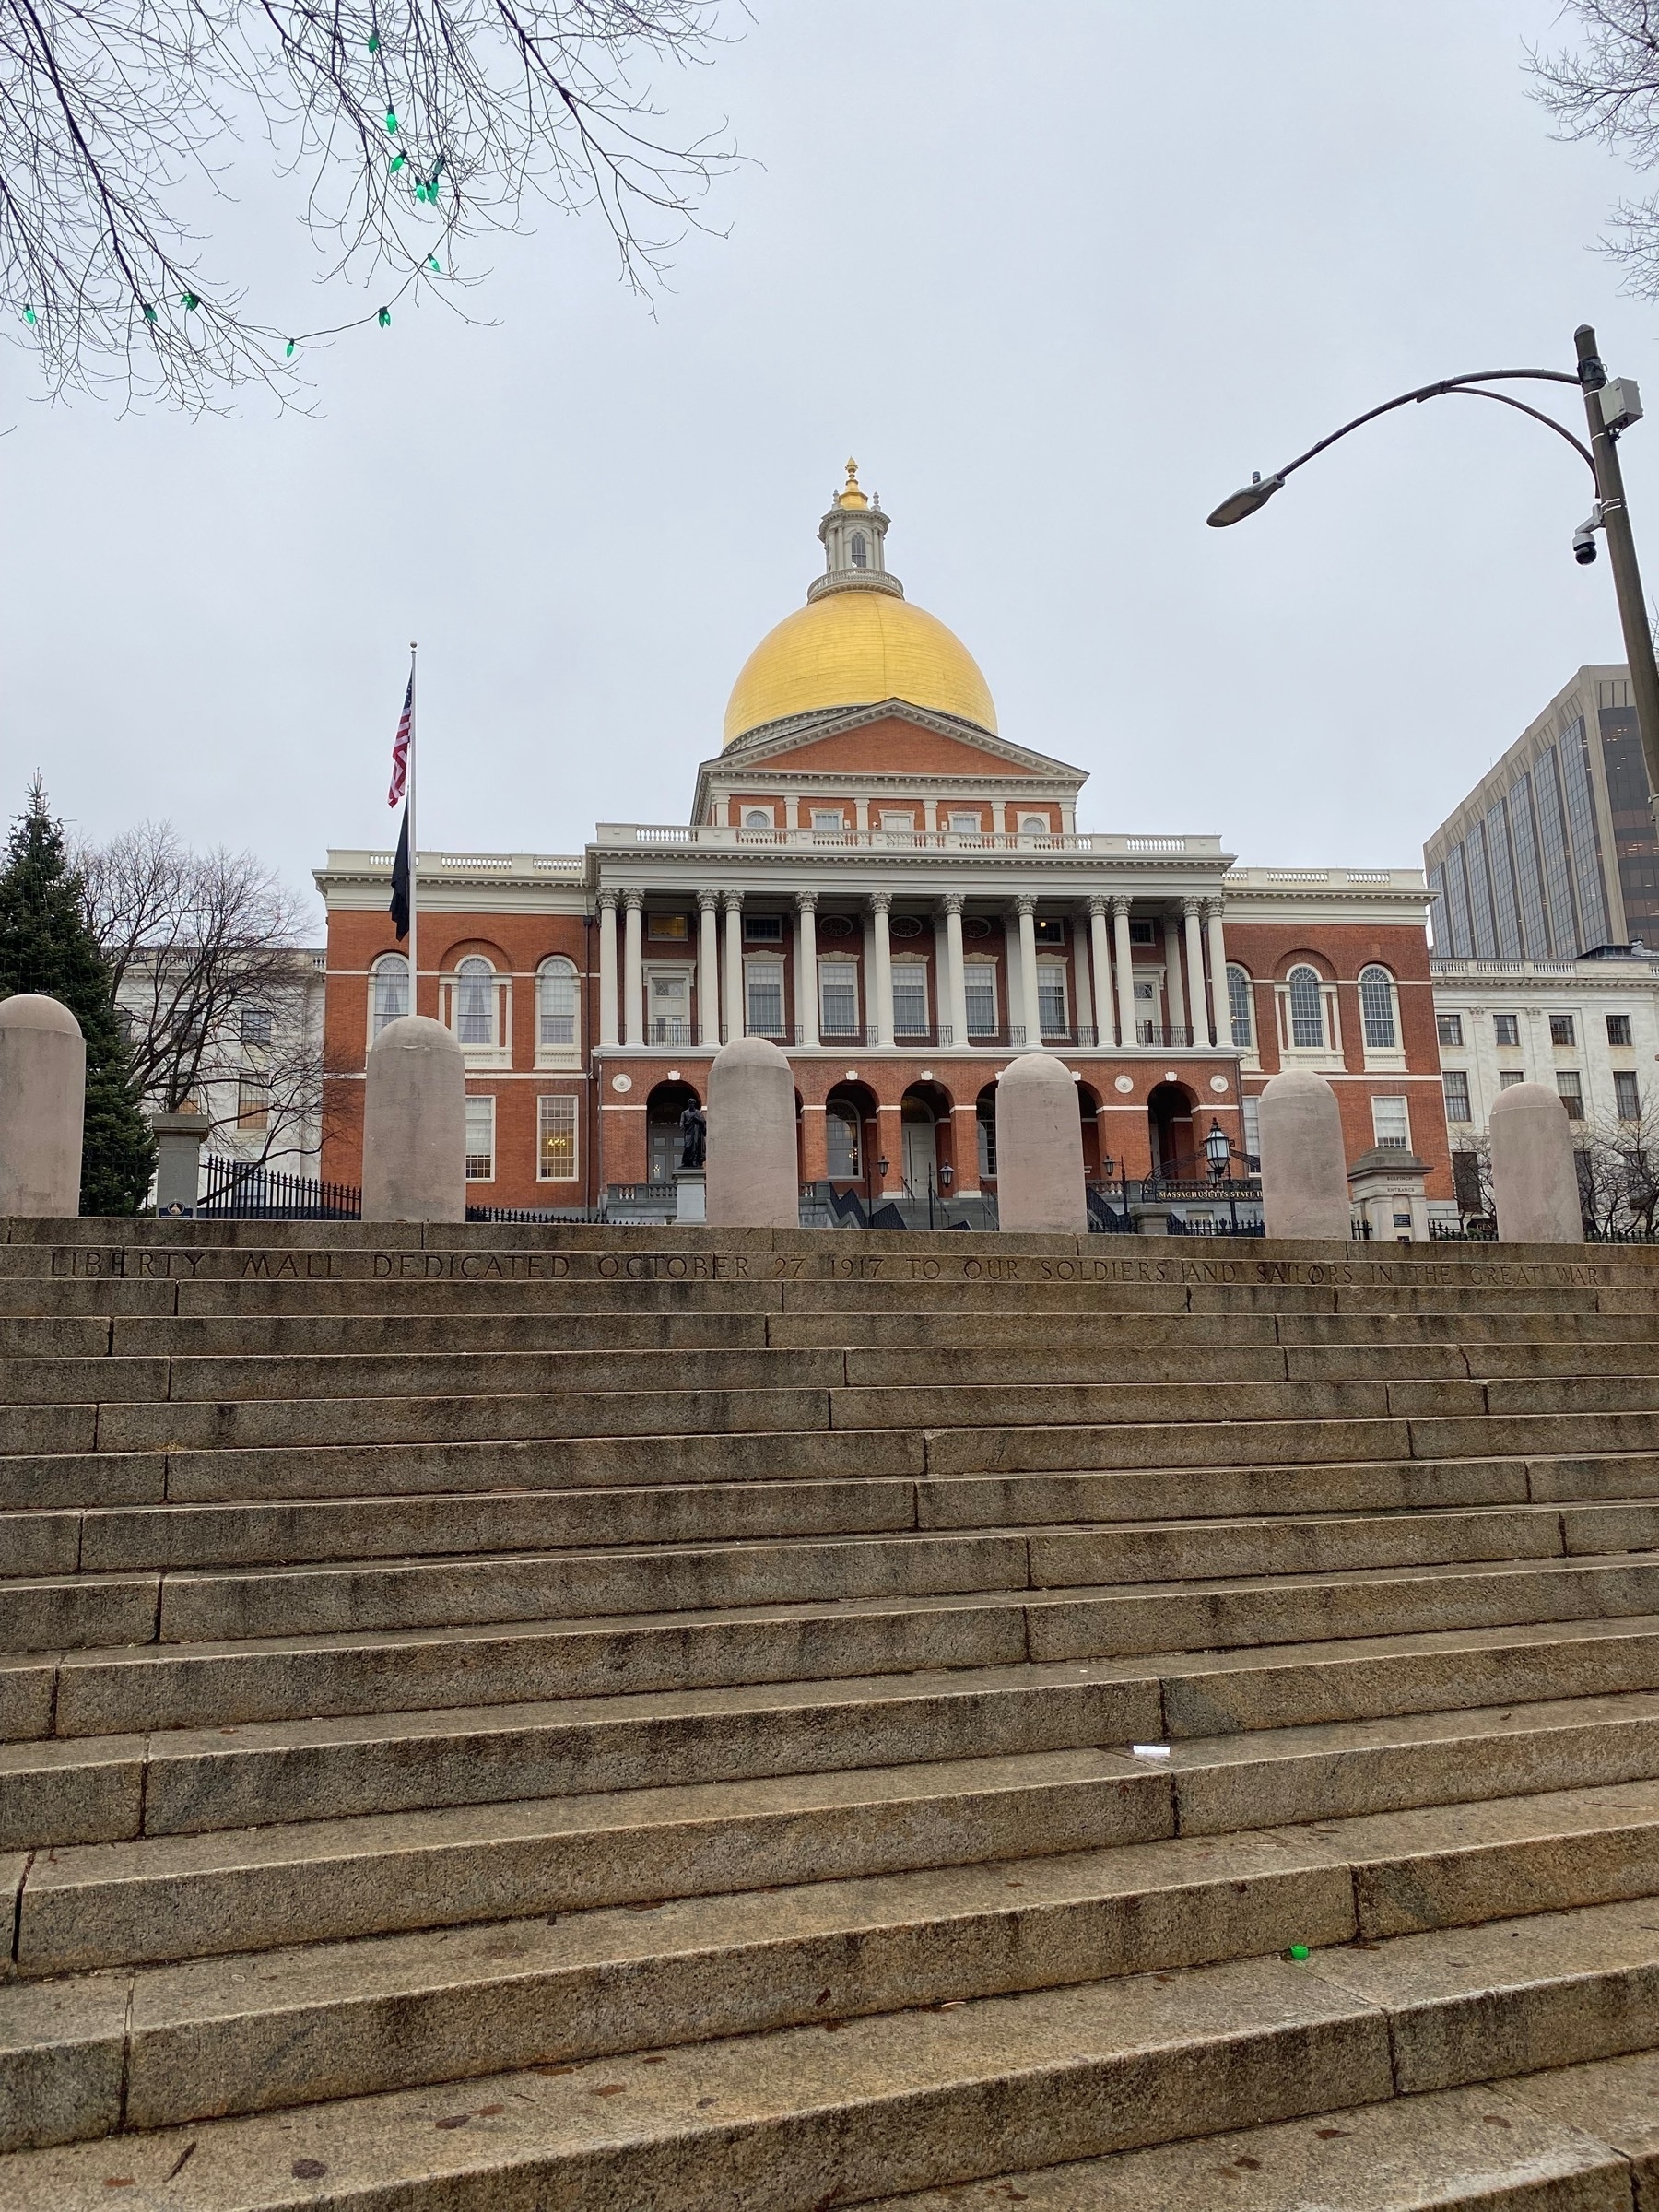 View of the Masschusetts capitol building from the front.